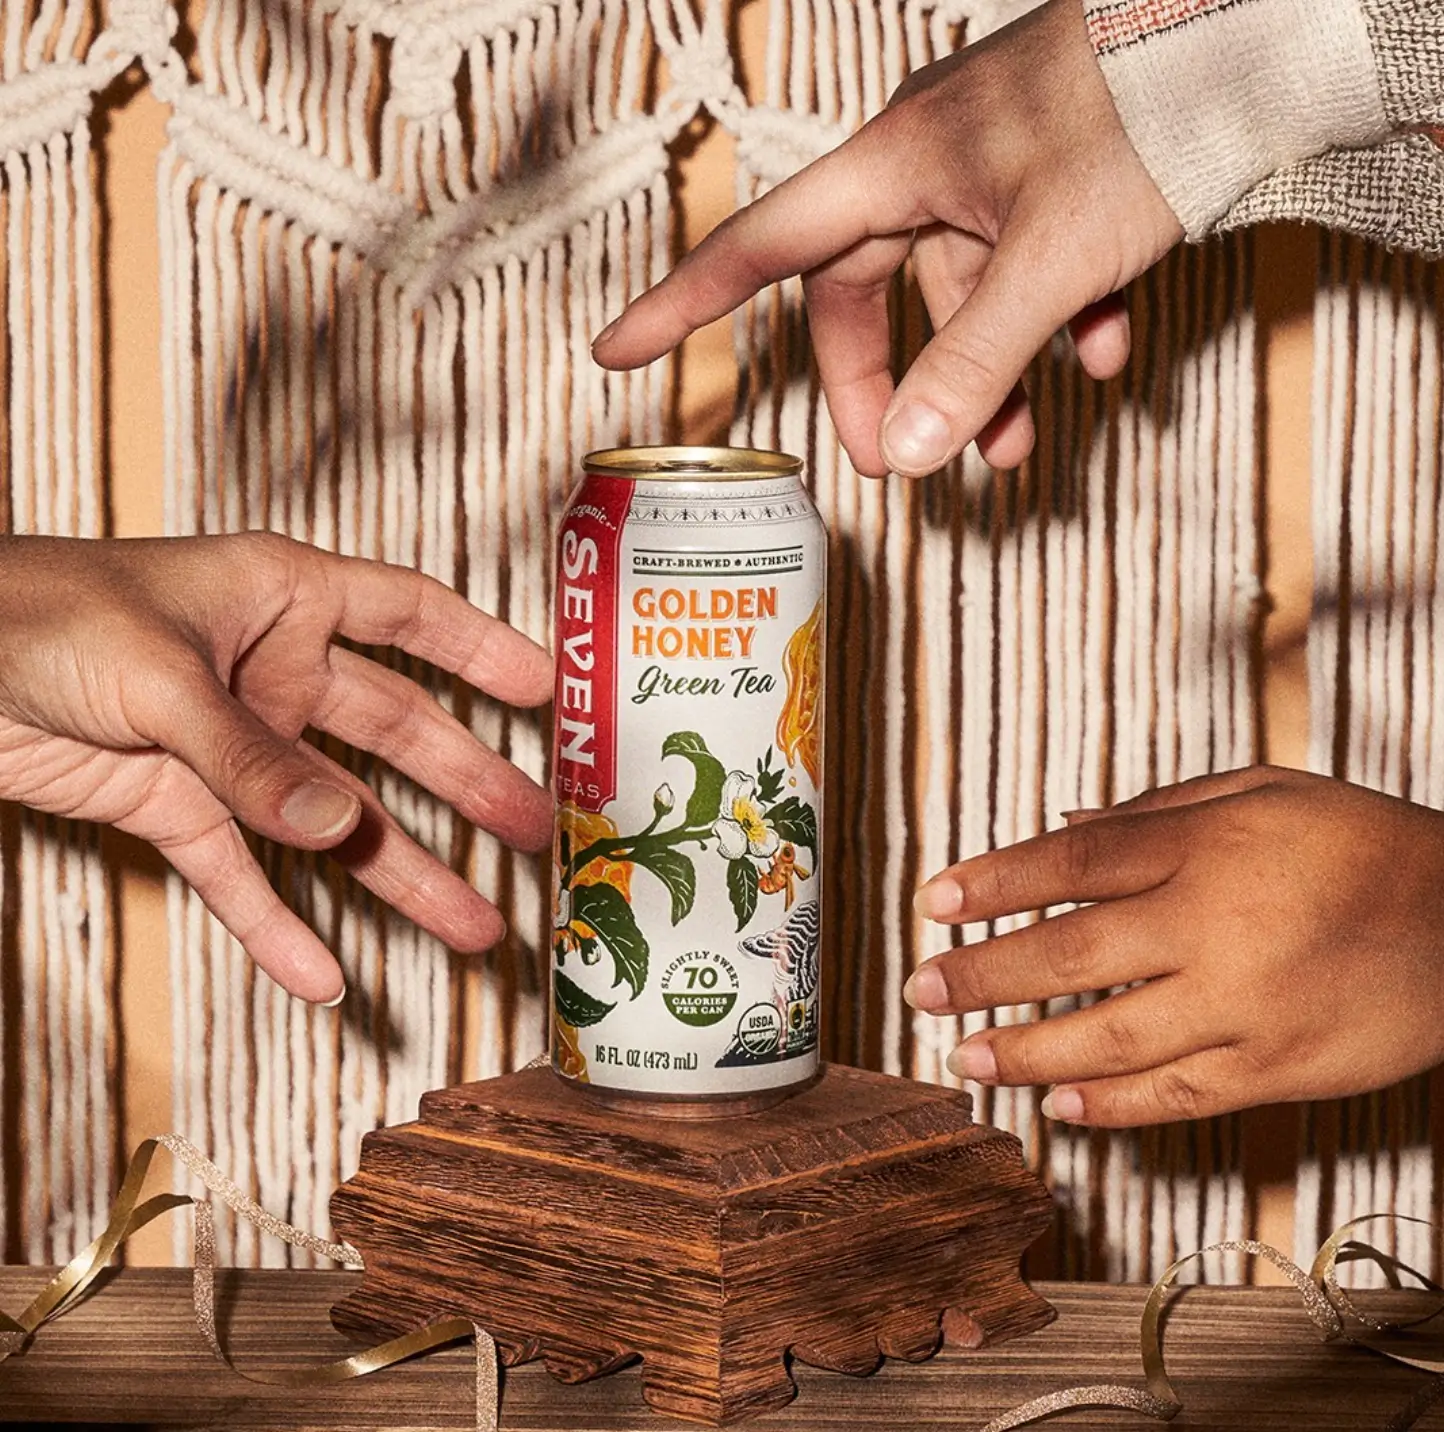 Capitalizing On Cans, Seven Teas Expands Their Distribution